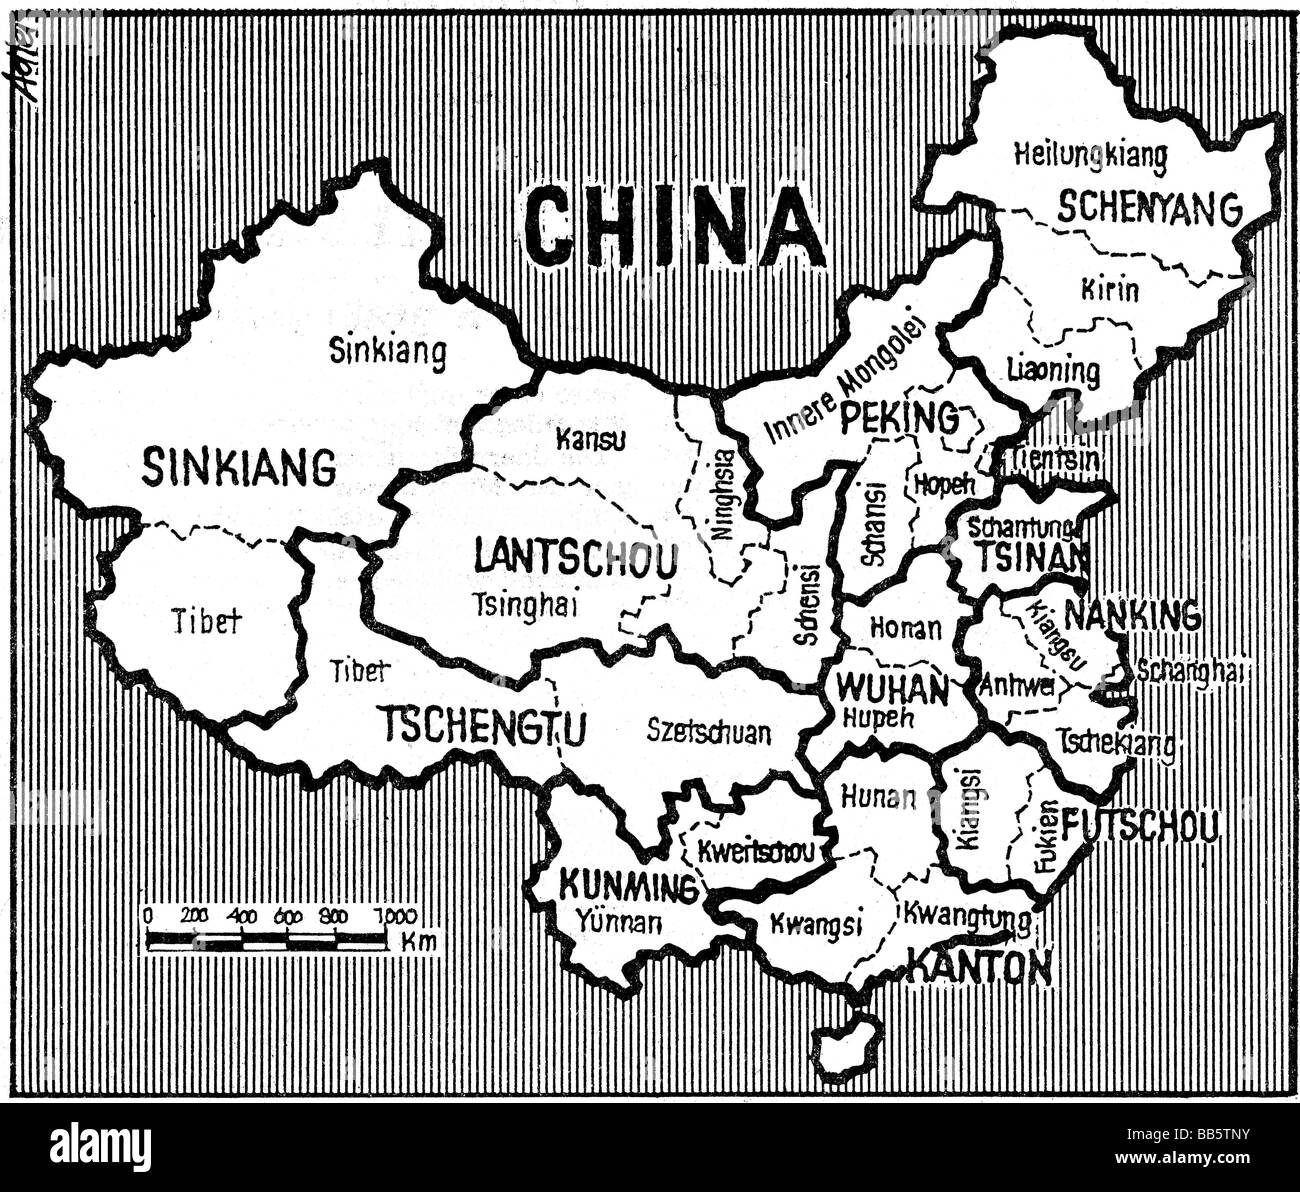 cartography, political maps, China, military regions of the People`s Republic of China, 1974, Stock Photo